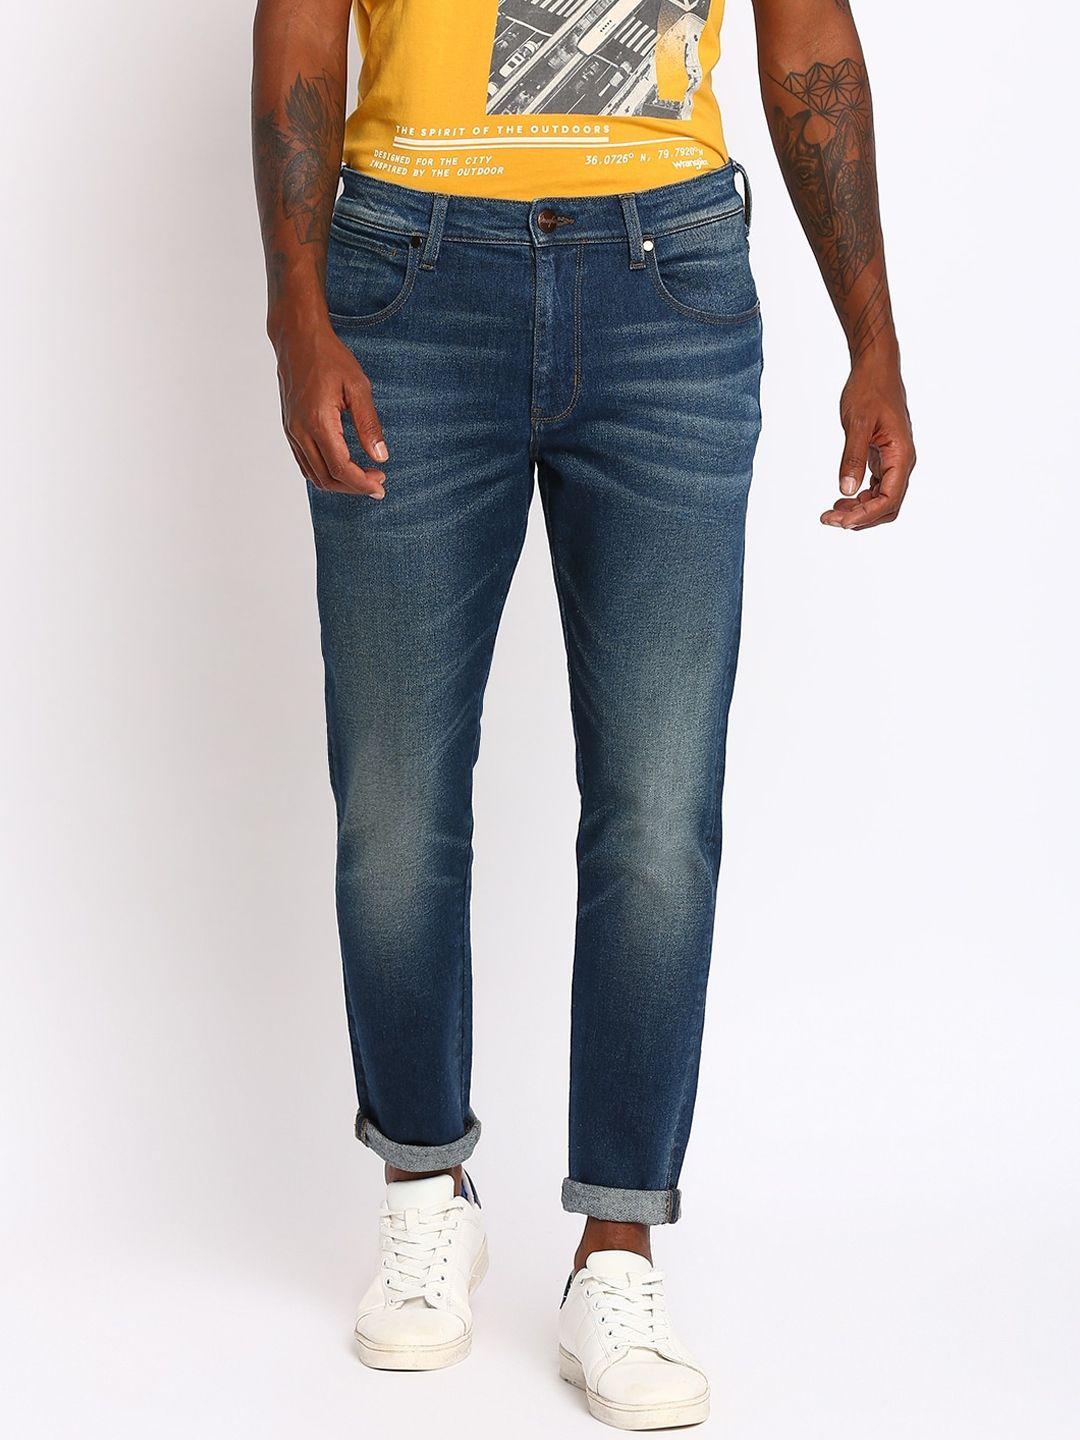 wrangler-men-blue-slim-fit-low-rise-heavy-fade-stretchable-jeans